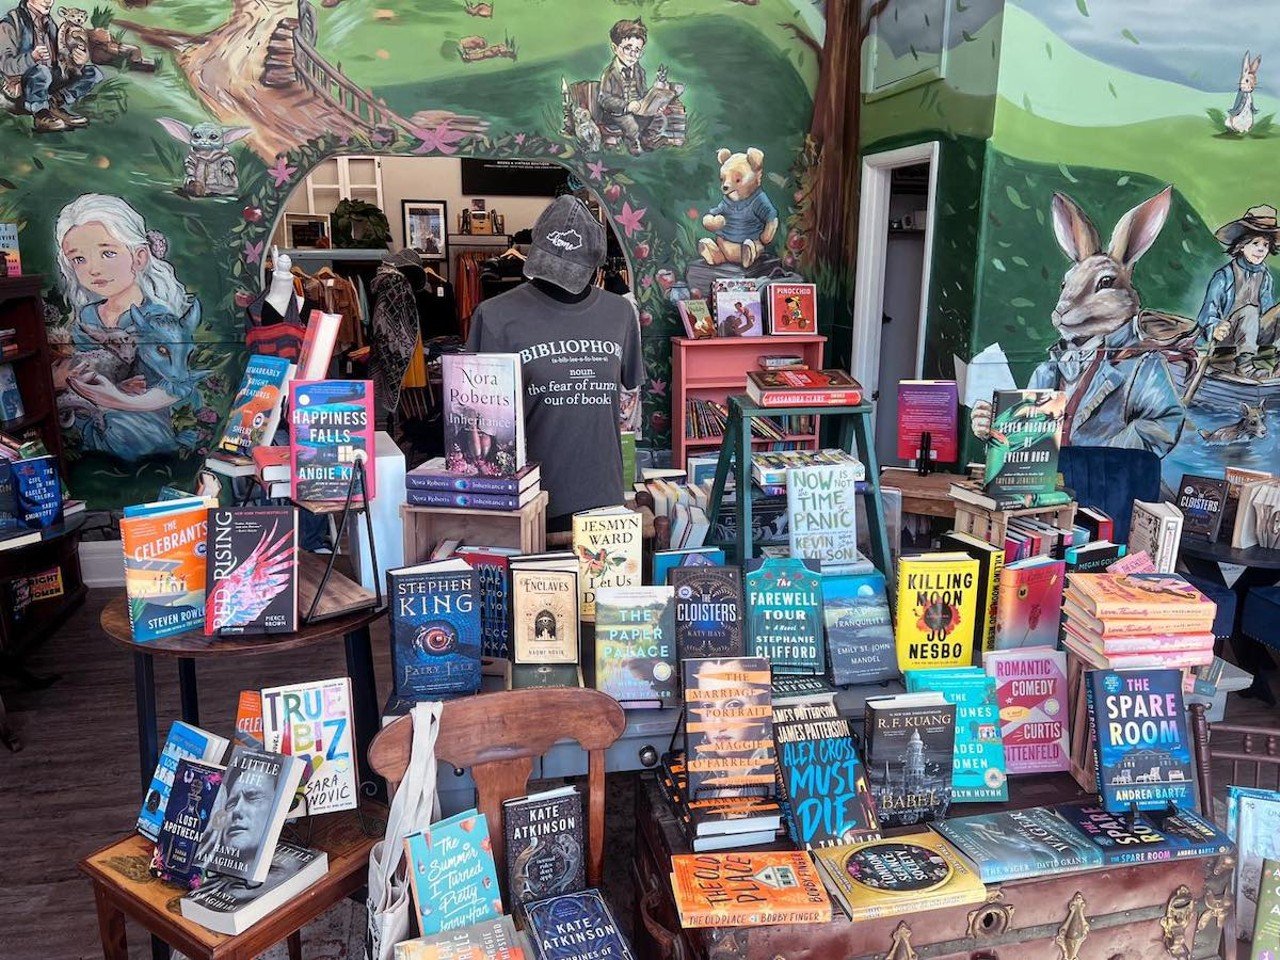 No. 9 Best Bookstore: Scarlet Rose Books & Vintage Boutique (formerly Tome Bookstore)
220 Elm St., Ludlow